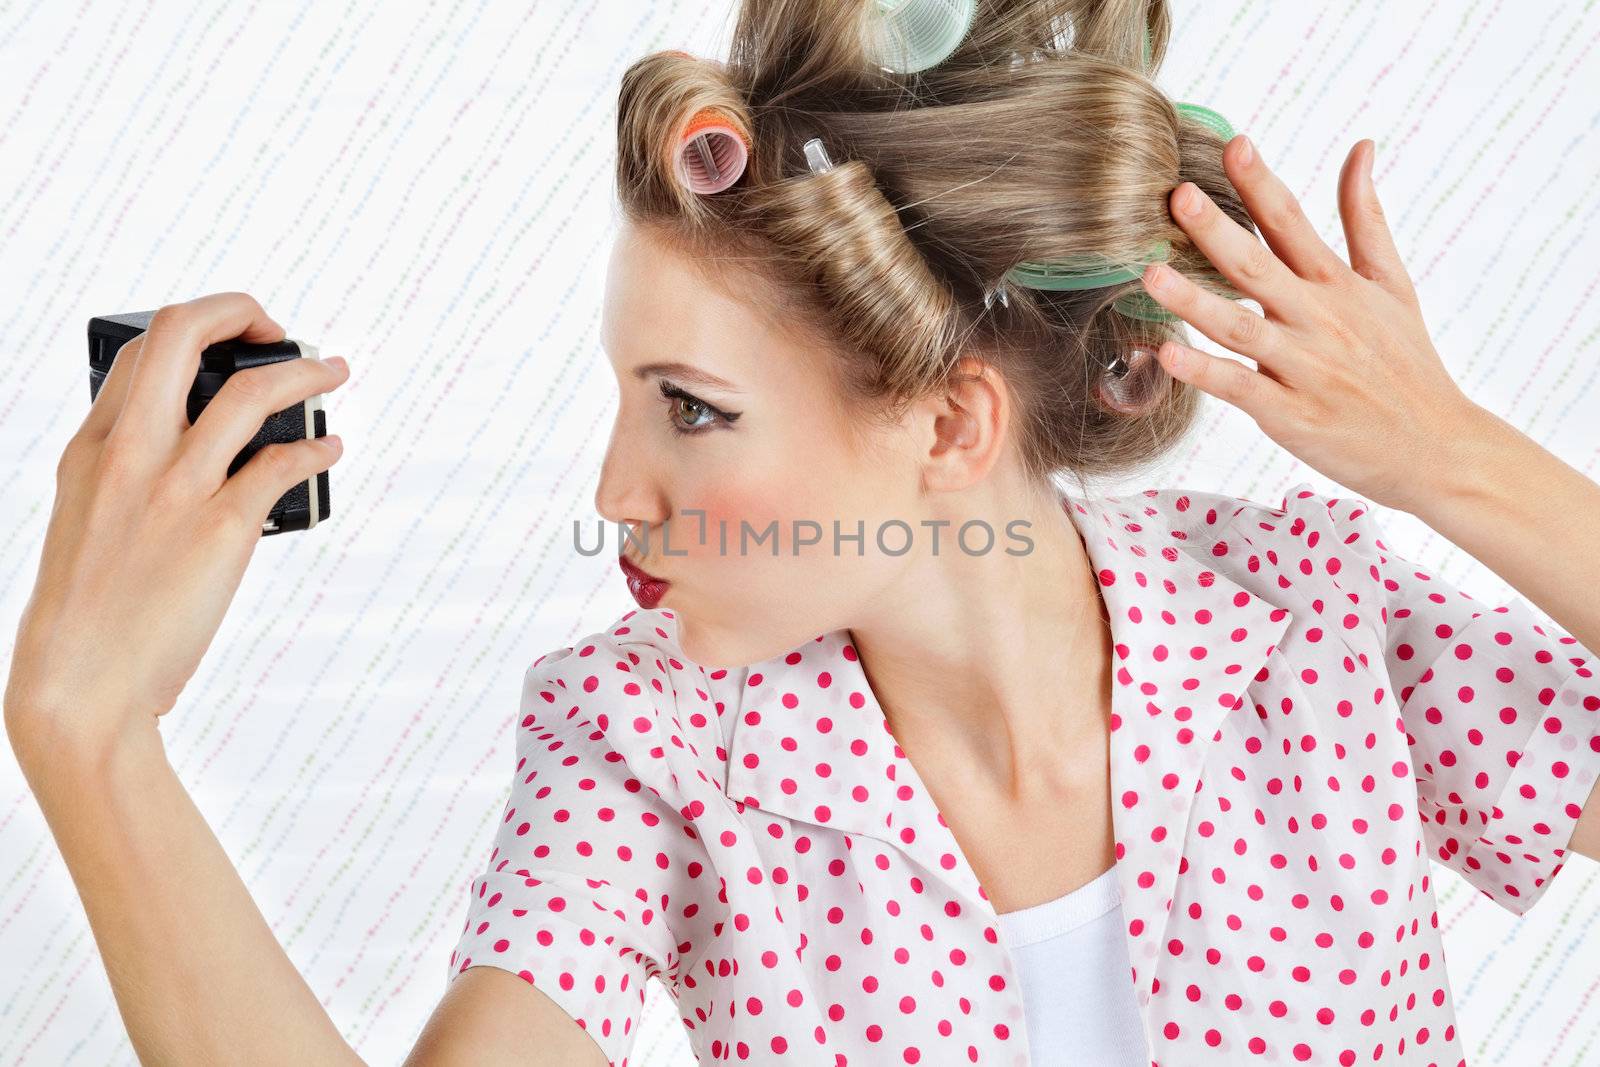 Young woman with hair curlers puckering while taking a self portrait through a vintage camera